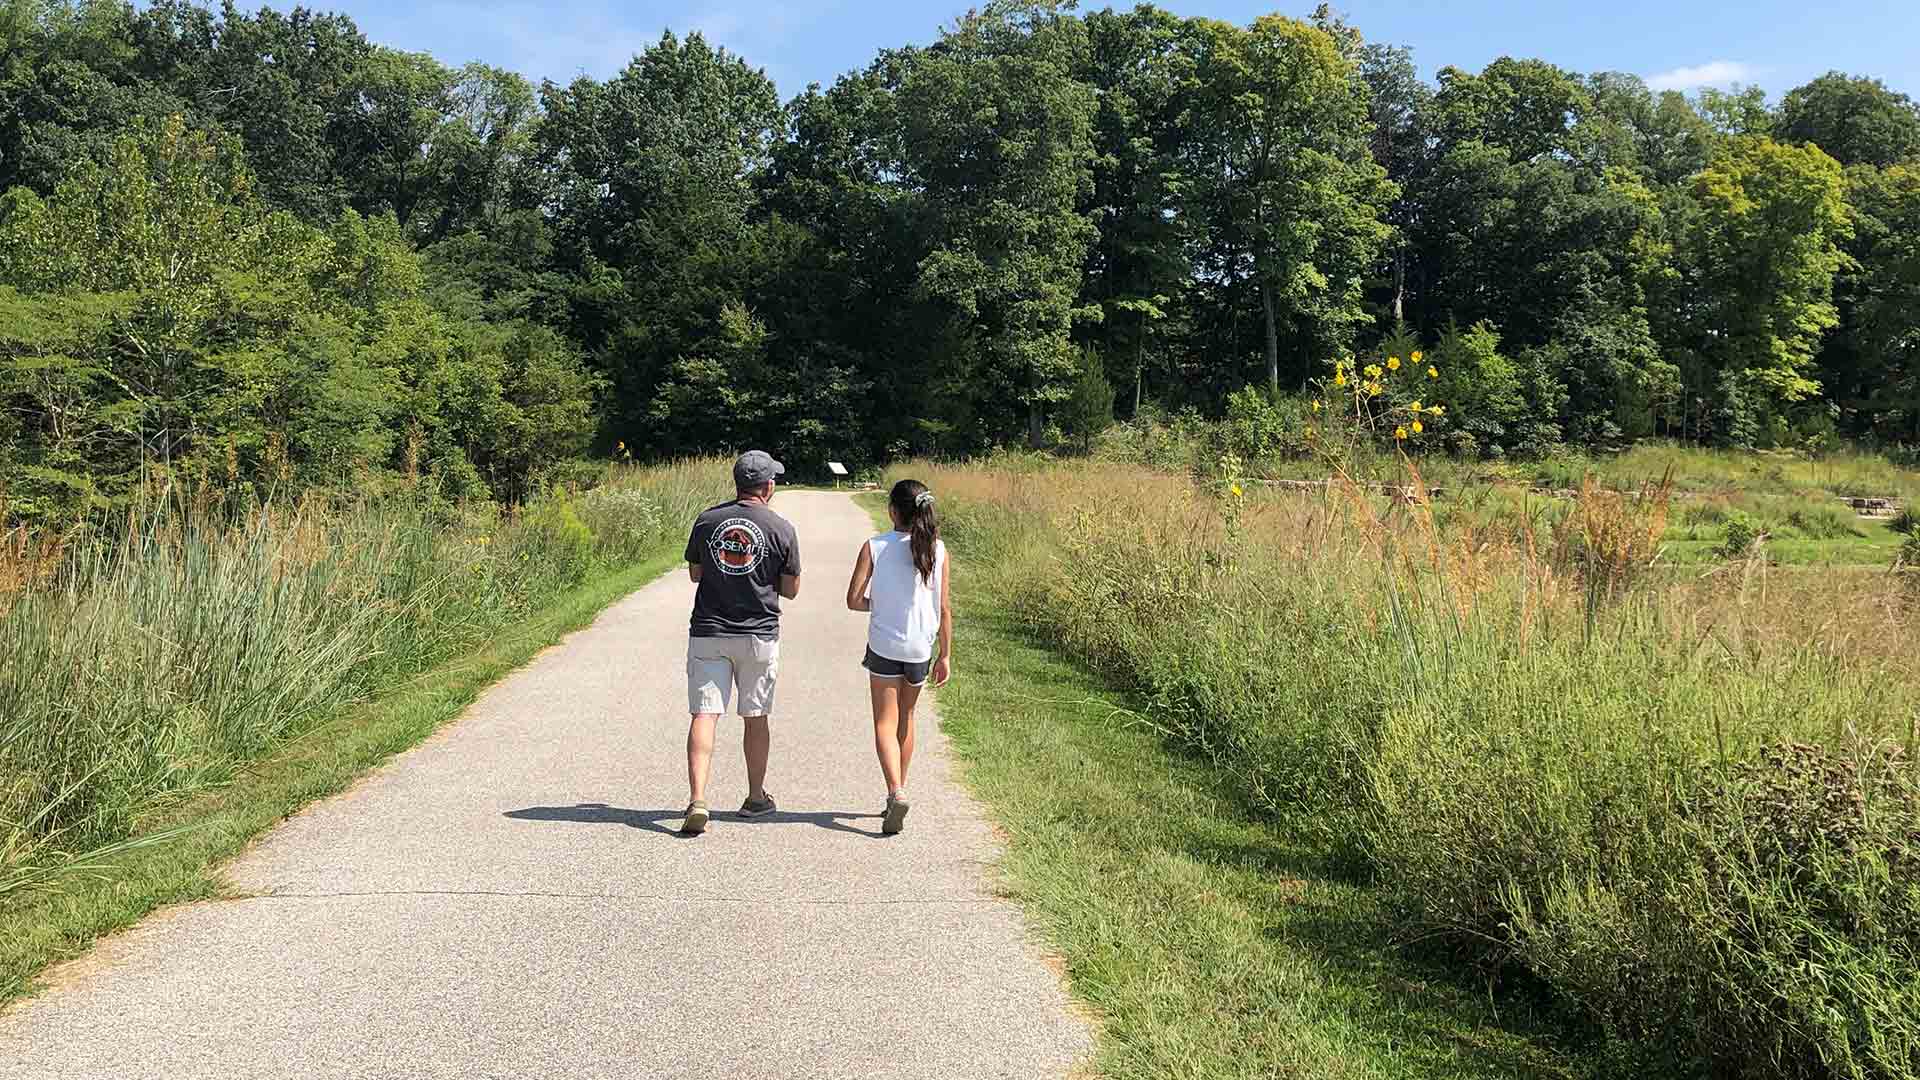 Father and daughter walking together in a park